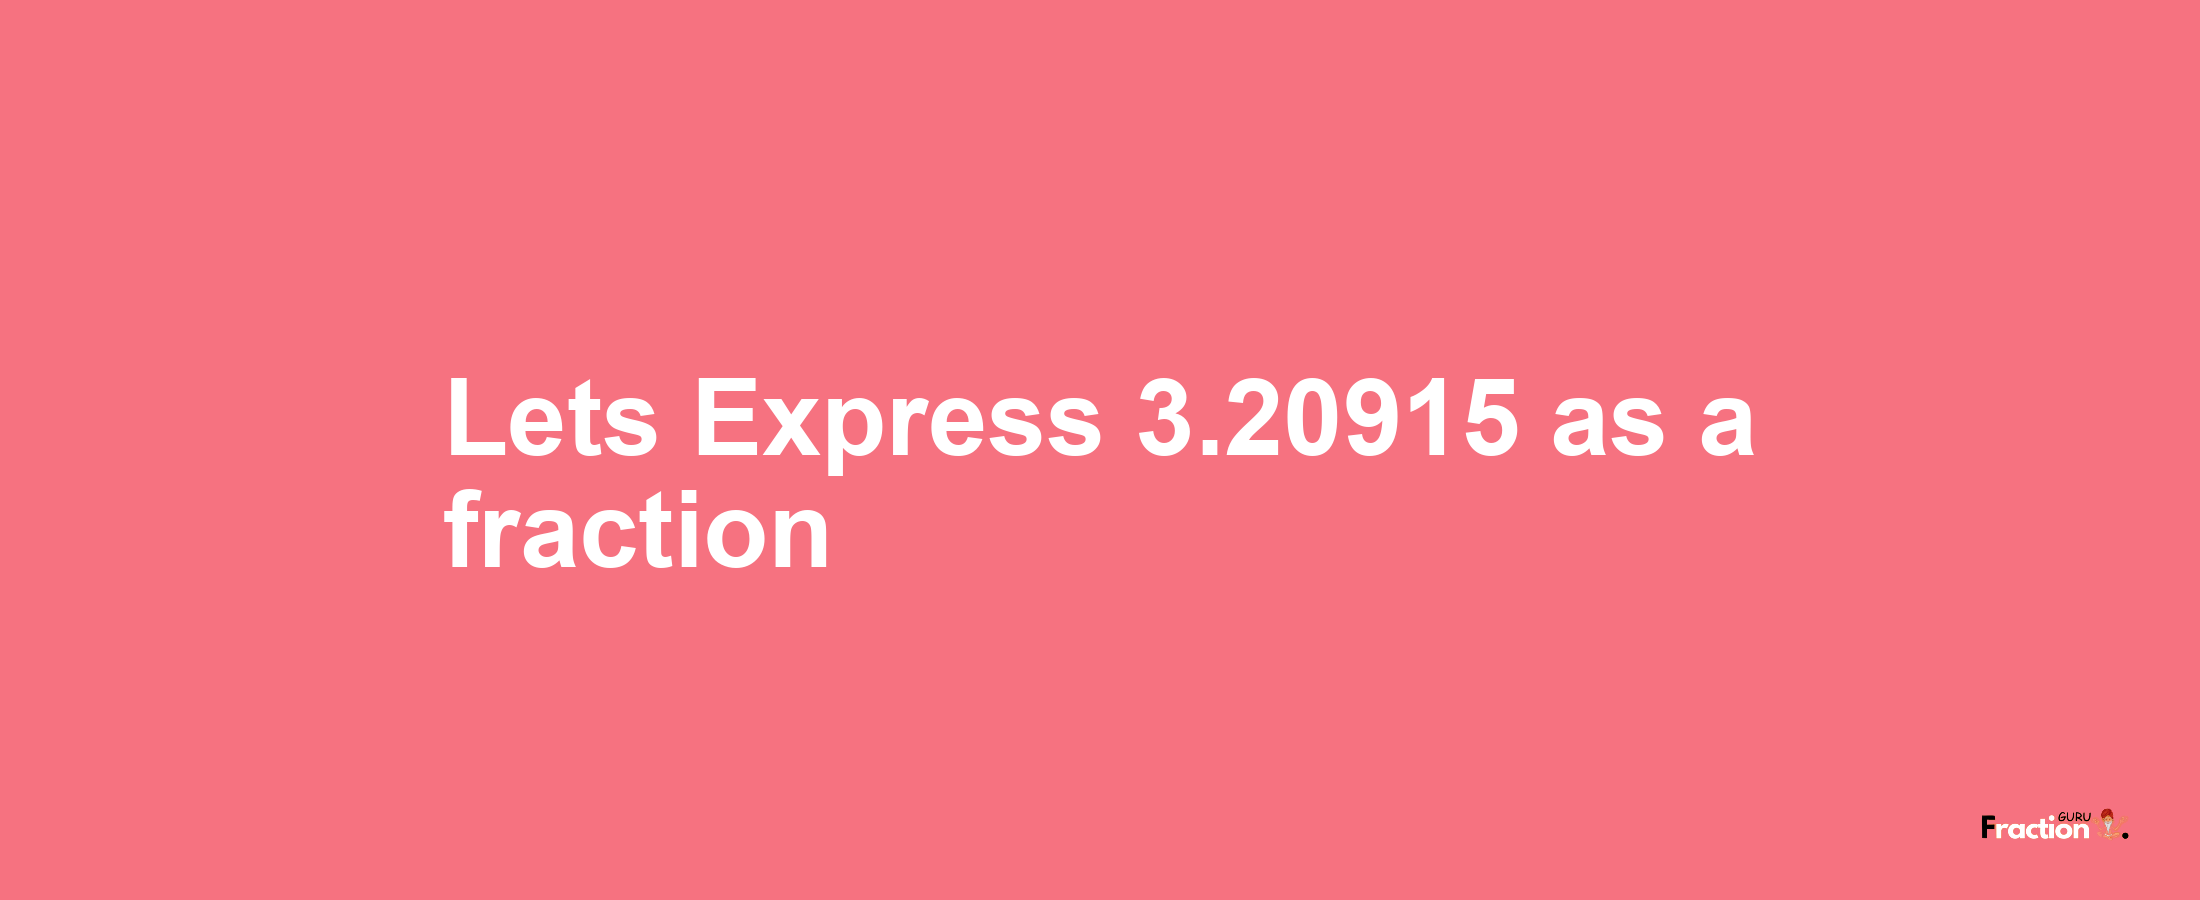 Lets Express 3.20915 as afraction